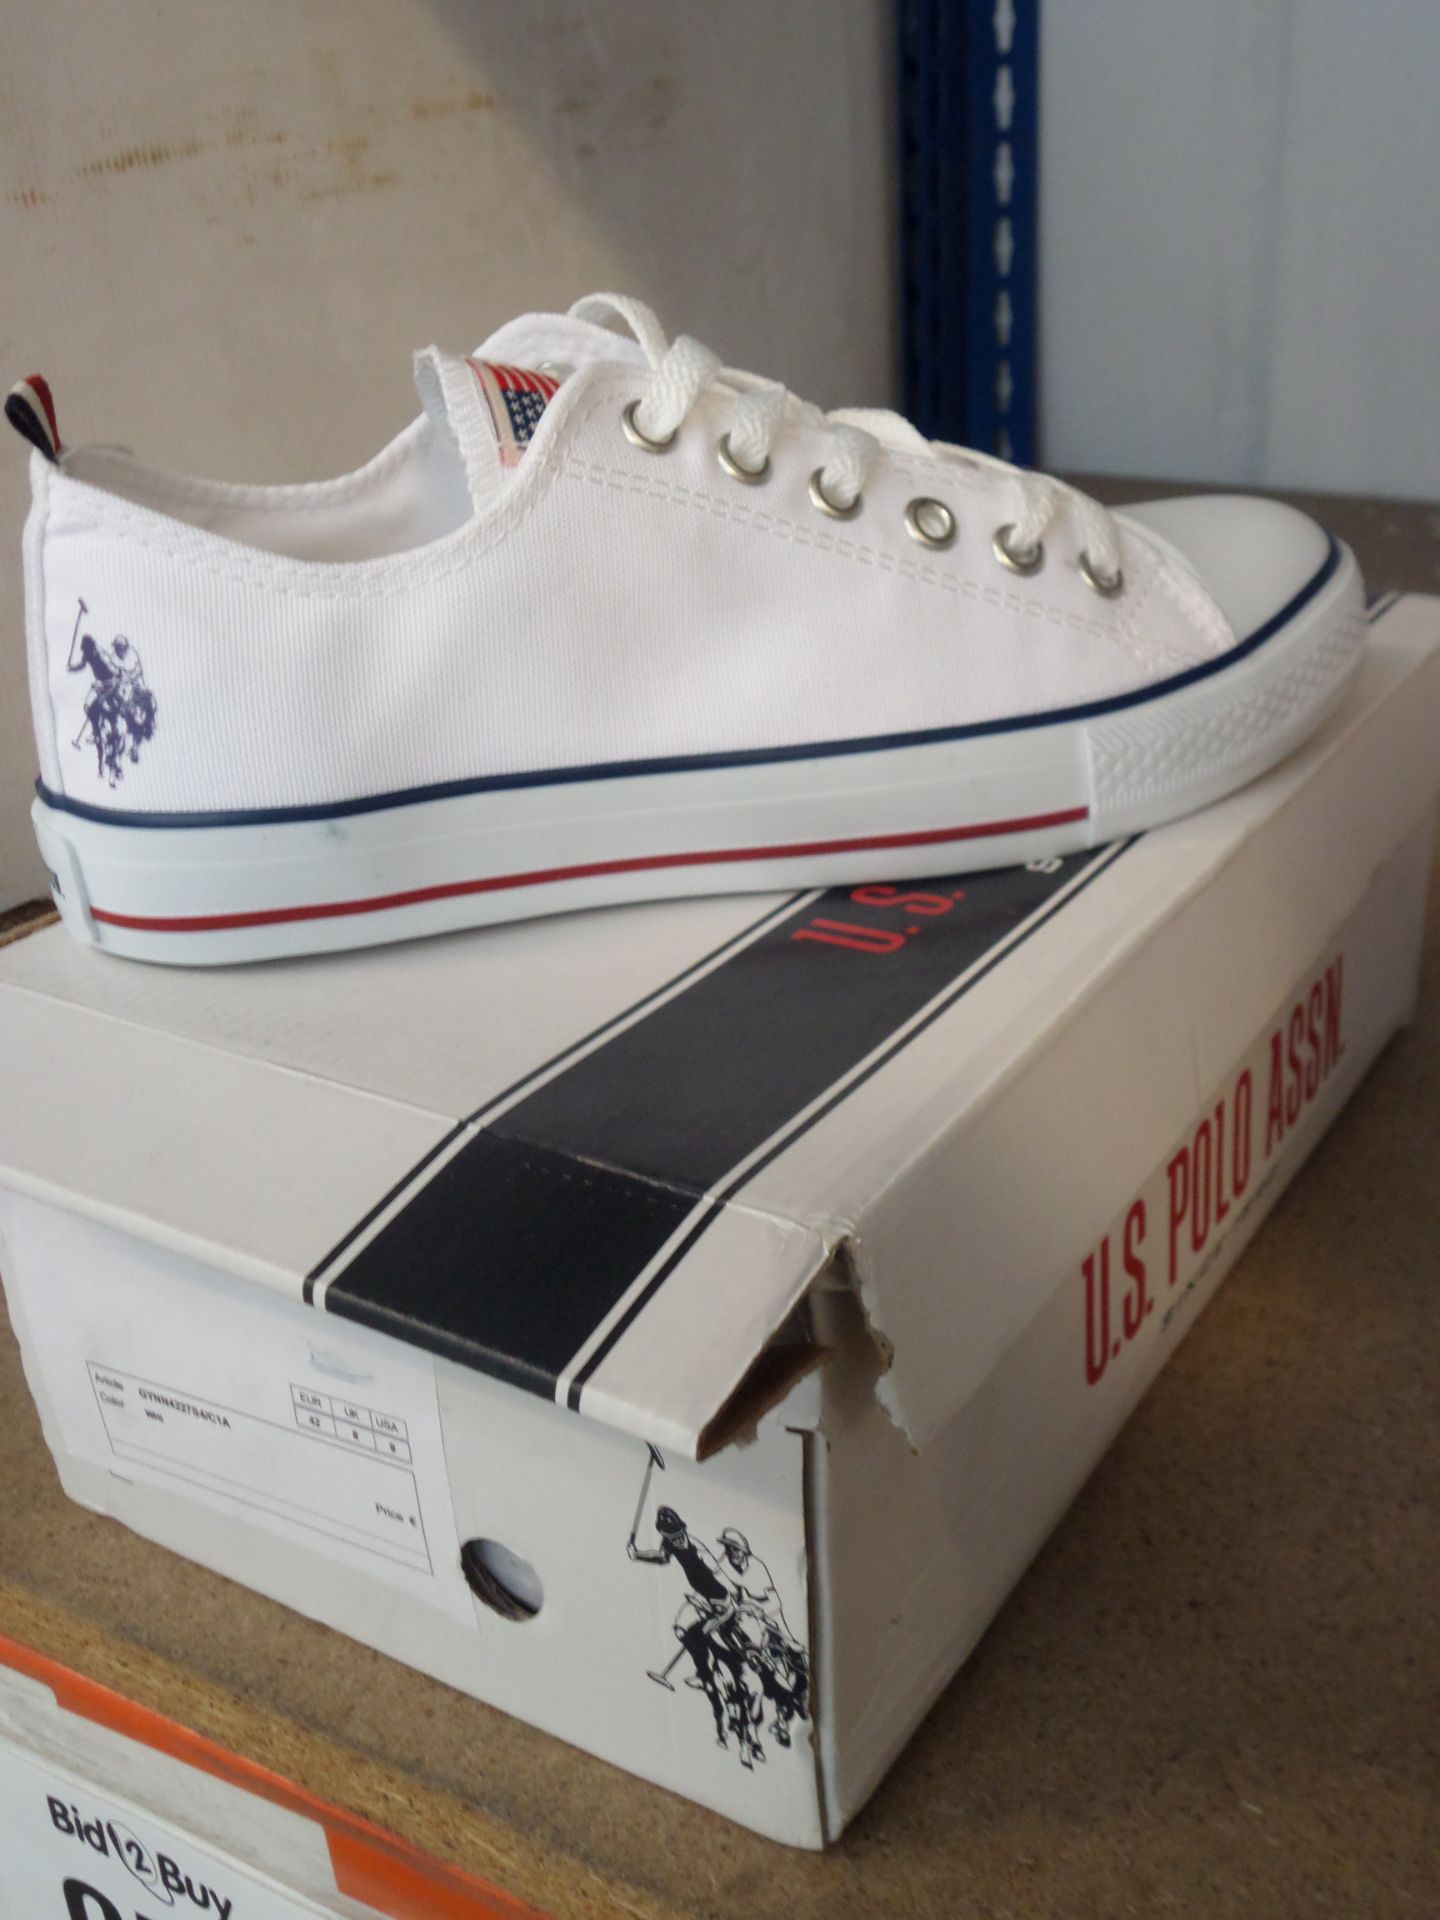 U.S POLO ASSN, SINCE 1890 MENS CANVAS SHOES WHITE - UK 8 - NEW